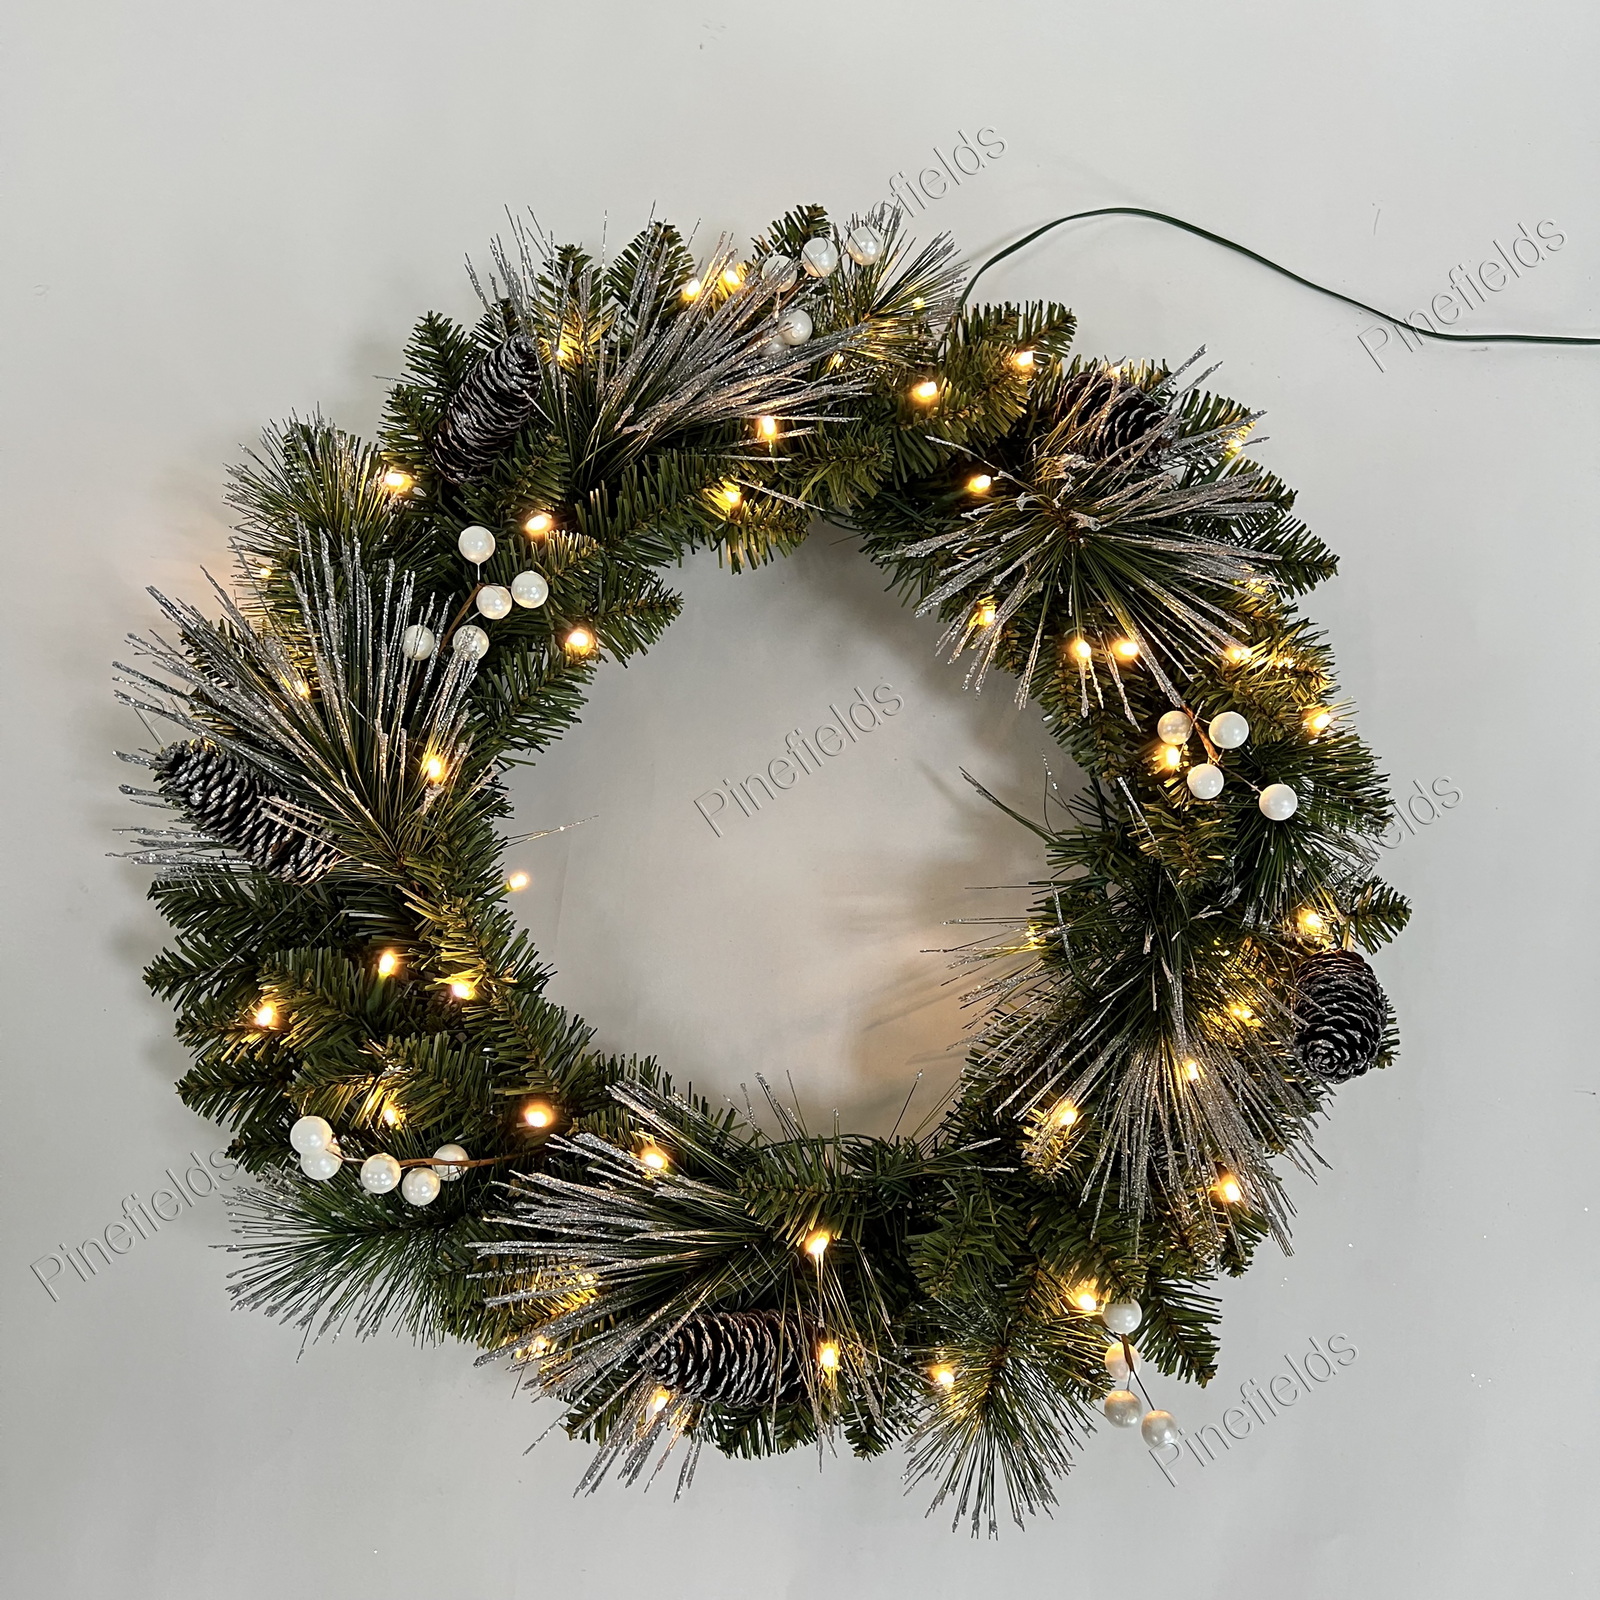 Artificial Christmas Wreath 24″, Christmas Wreath With Pinecones And White Berries, Christmas Wreath With Lights, twisted.#SFW-23W102G-50BC-B